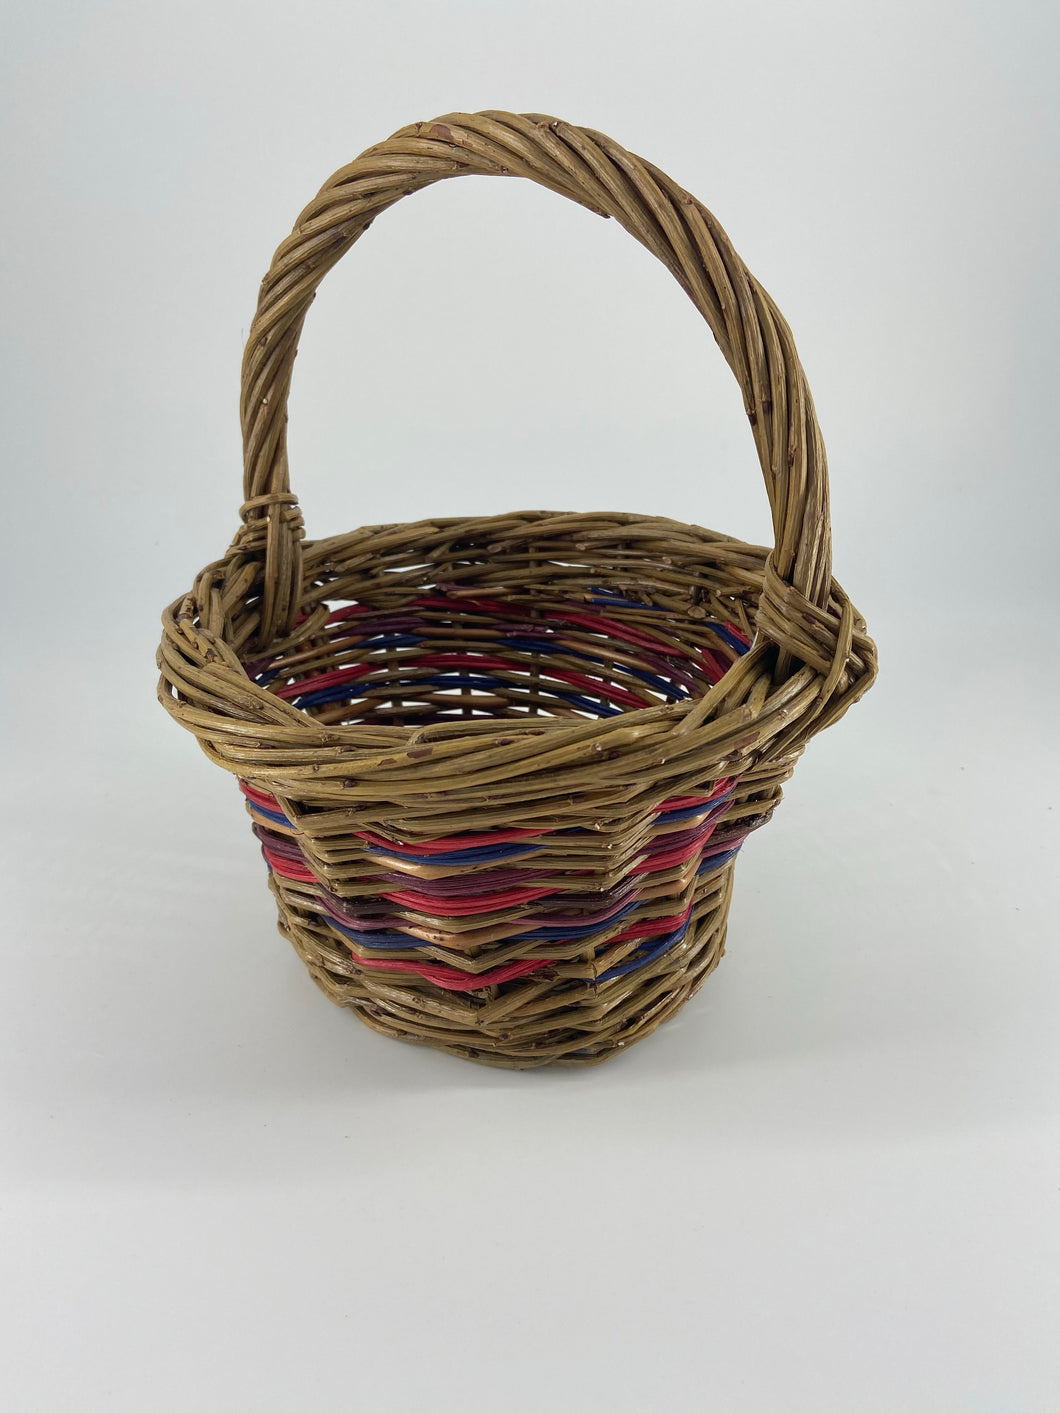 Small Willow & Cane Basket